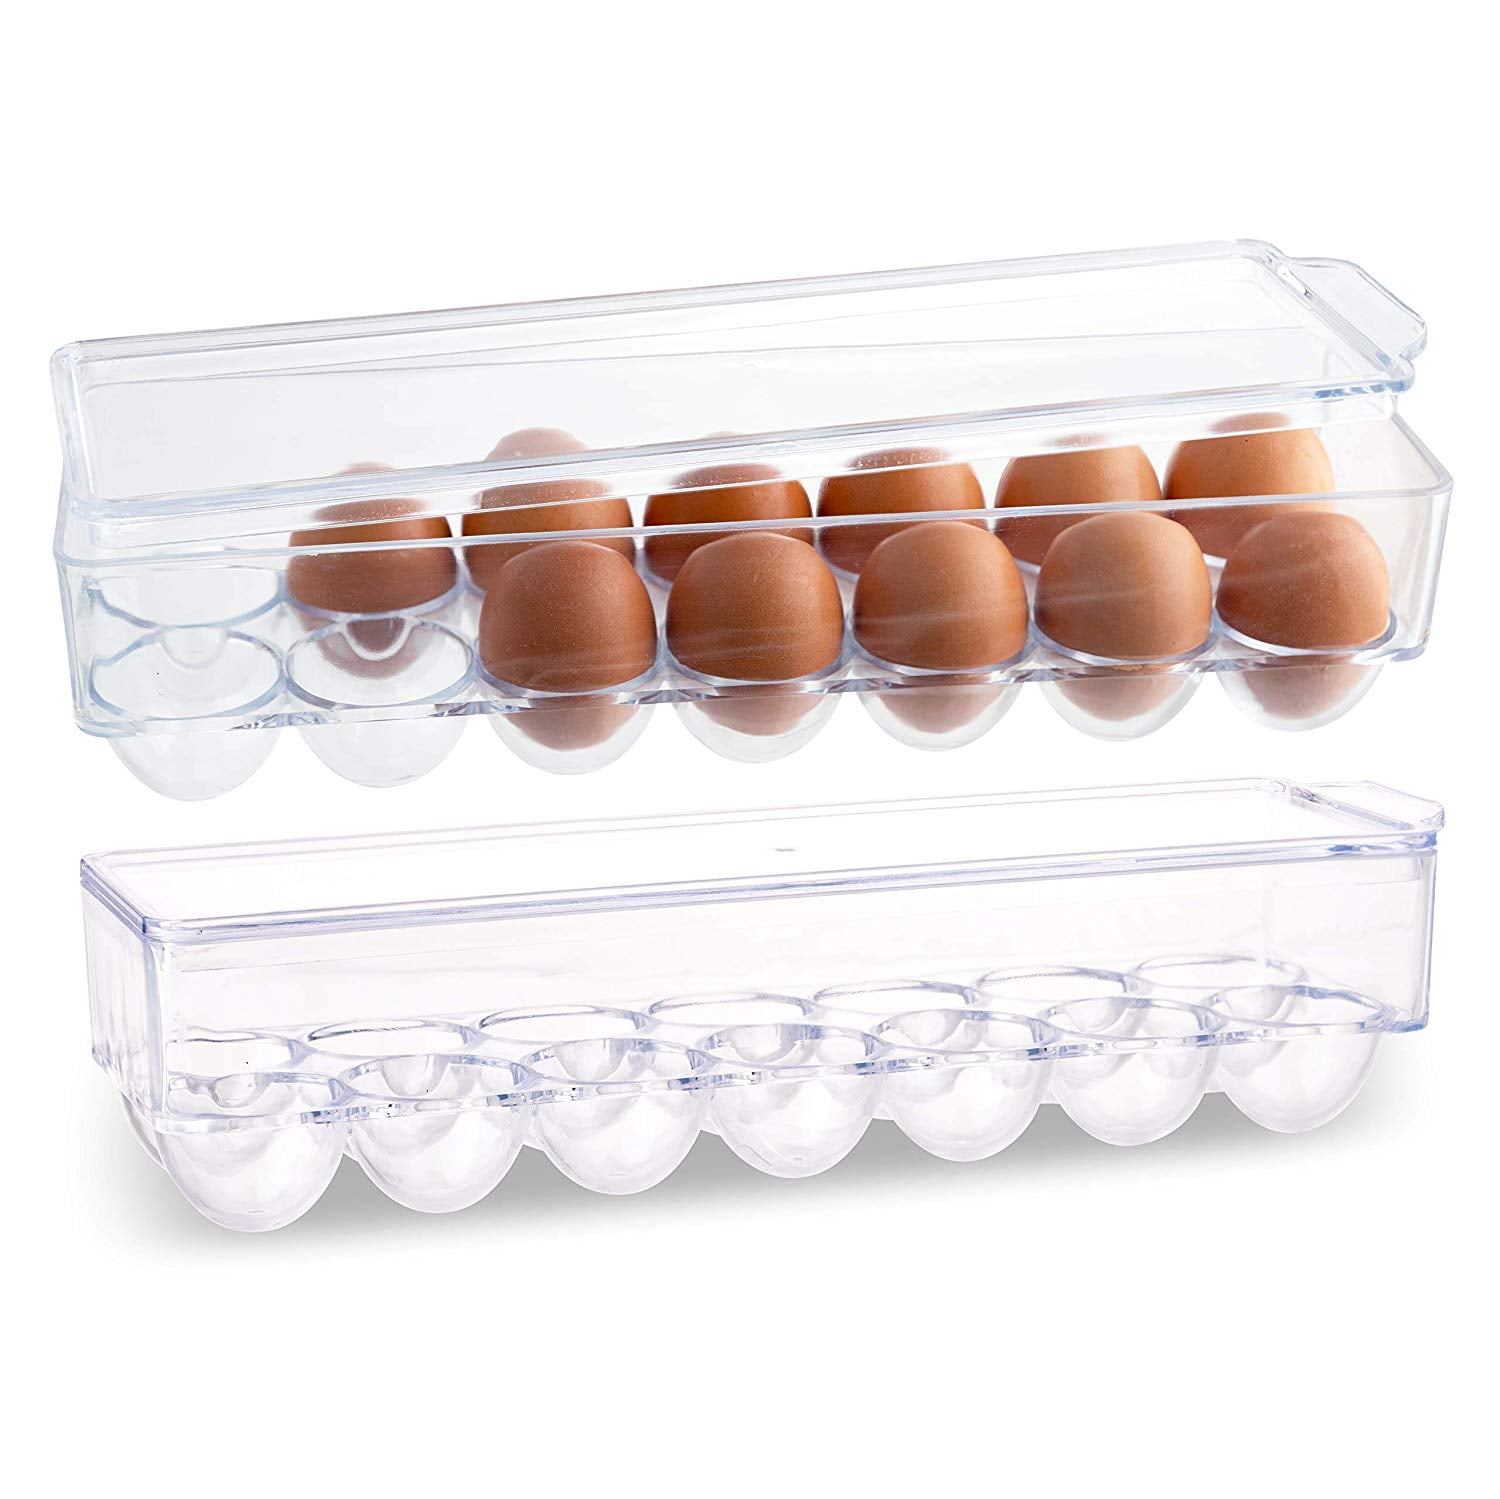 12 Cup Tray Egg Plastic Fresh Fridge Lidded Storage Holder Box Container 